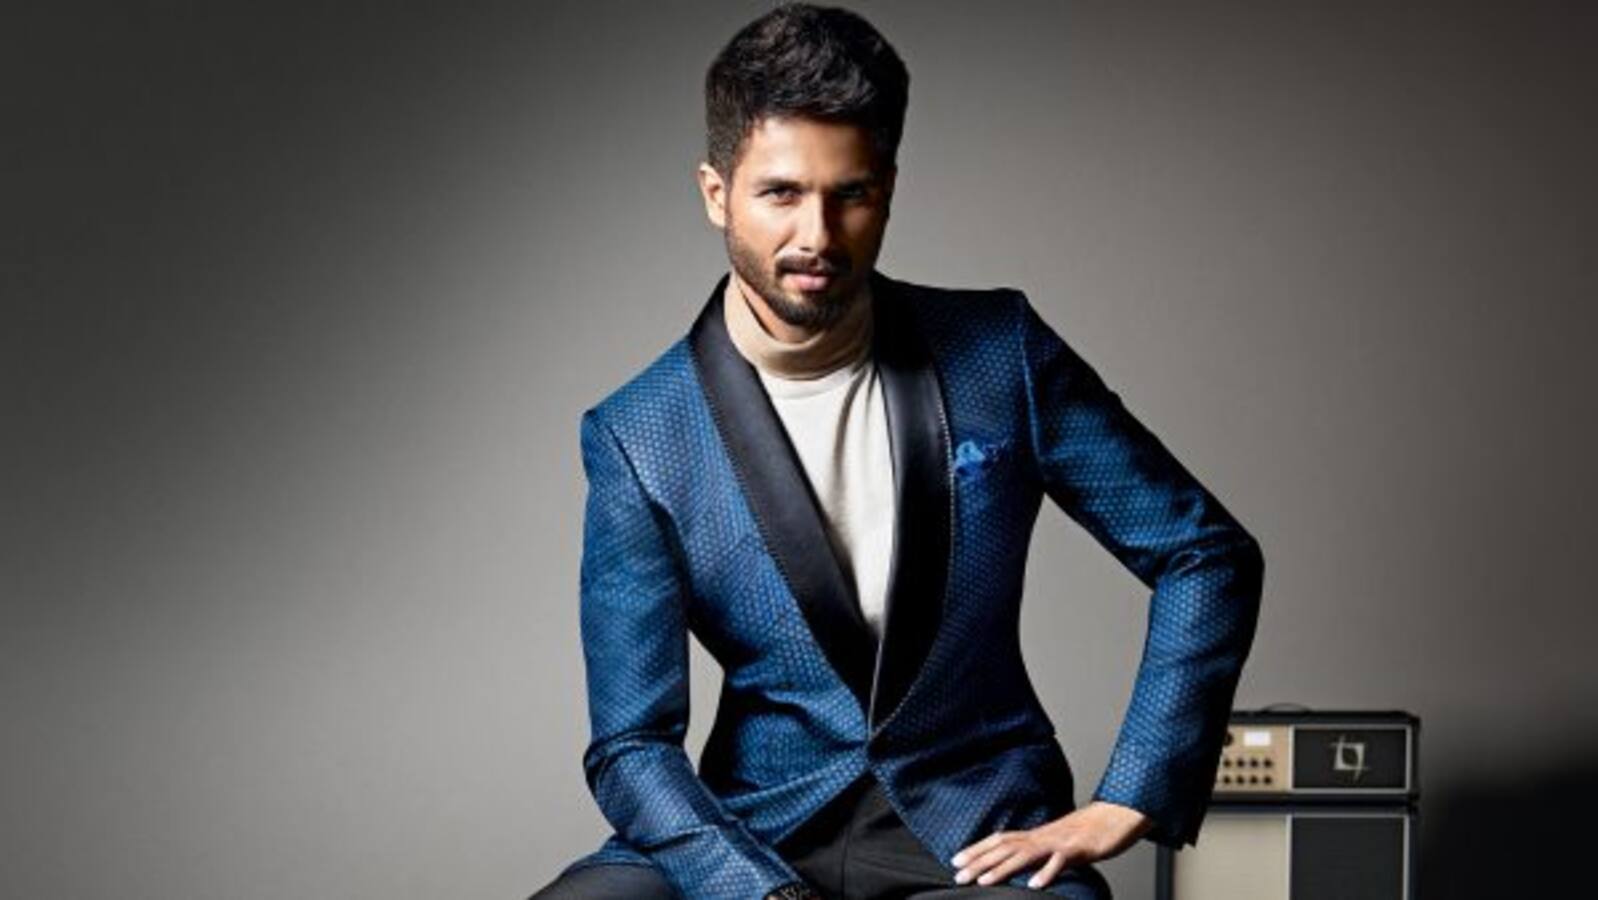 Can you believe Shahid Kapoor got rejected at a 100 auditions before he got the big break?